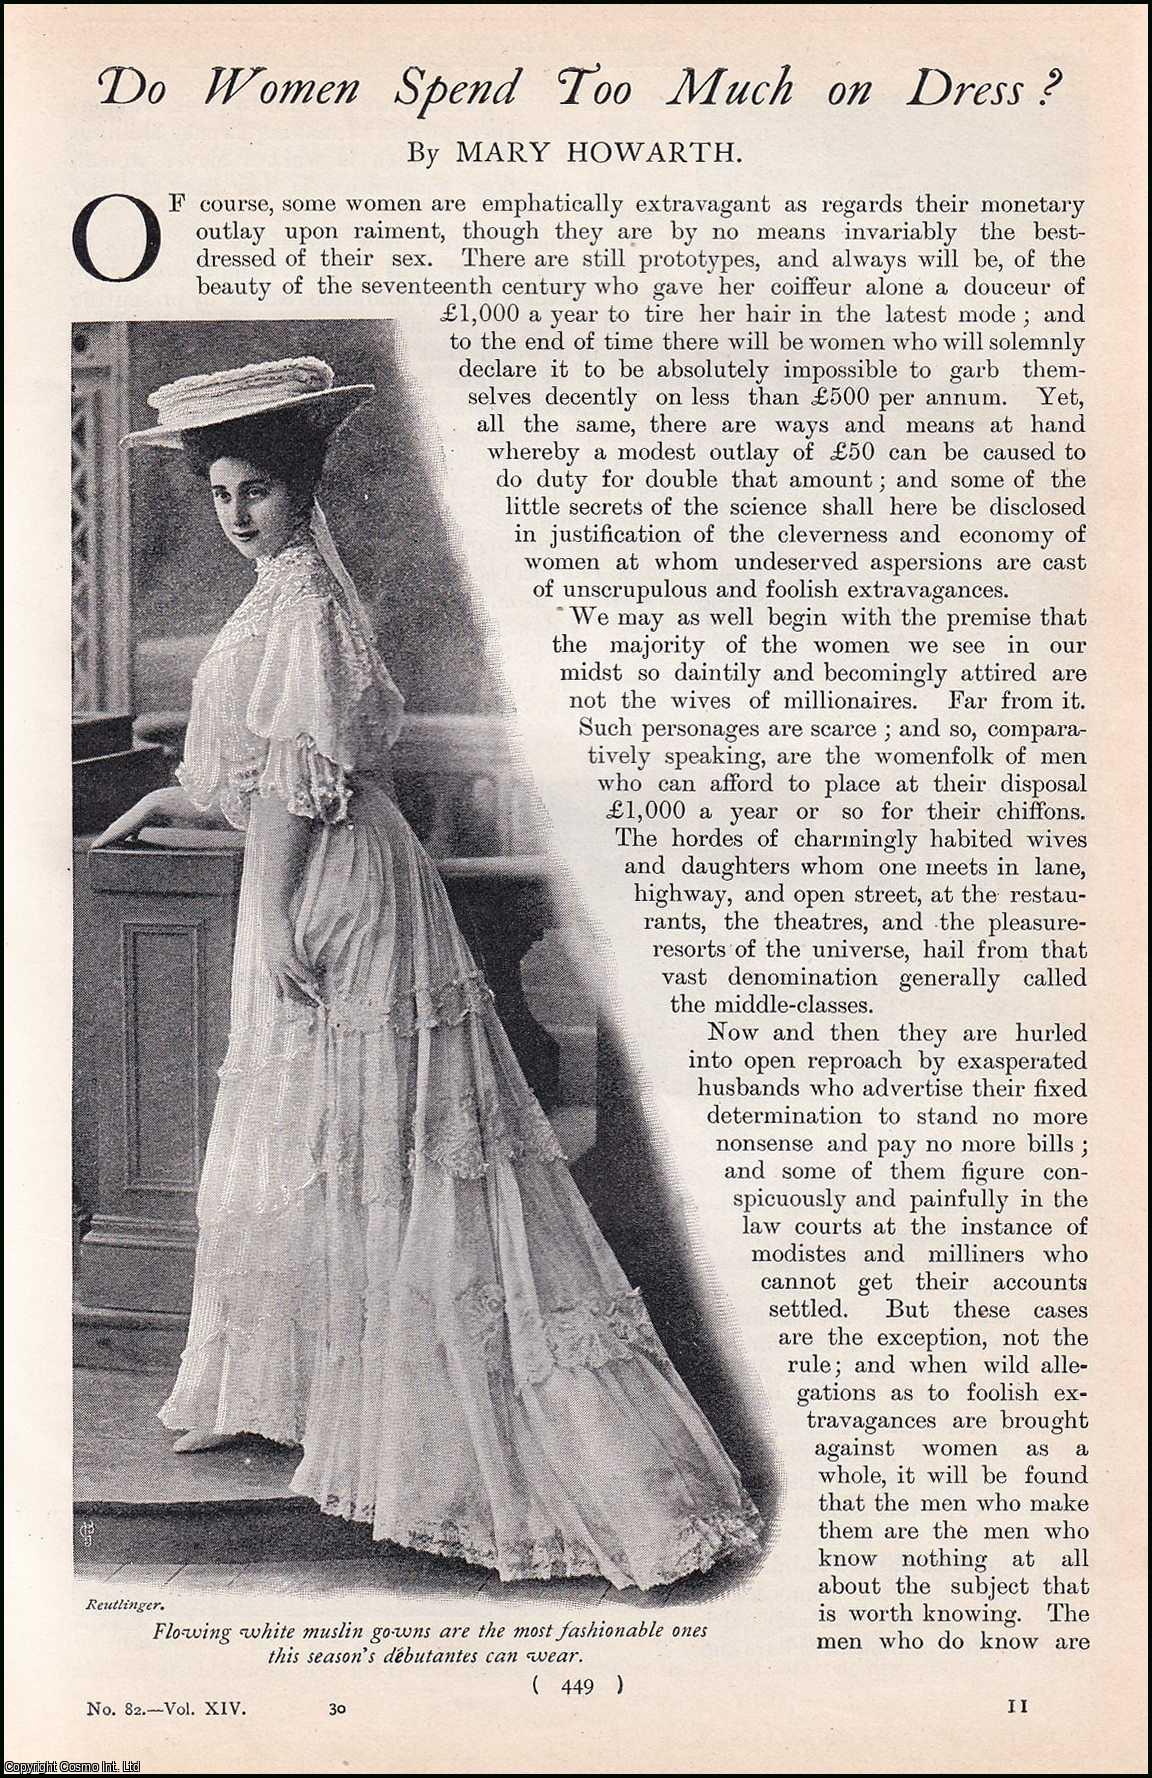 Mary Howarth - Do Women Spend to Much on Dress ? An uncommon original article from the Harmsworth London Magazine, 1905.